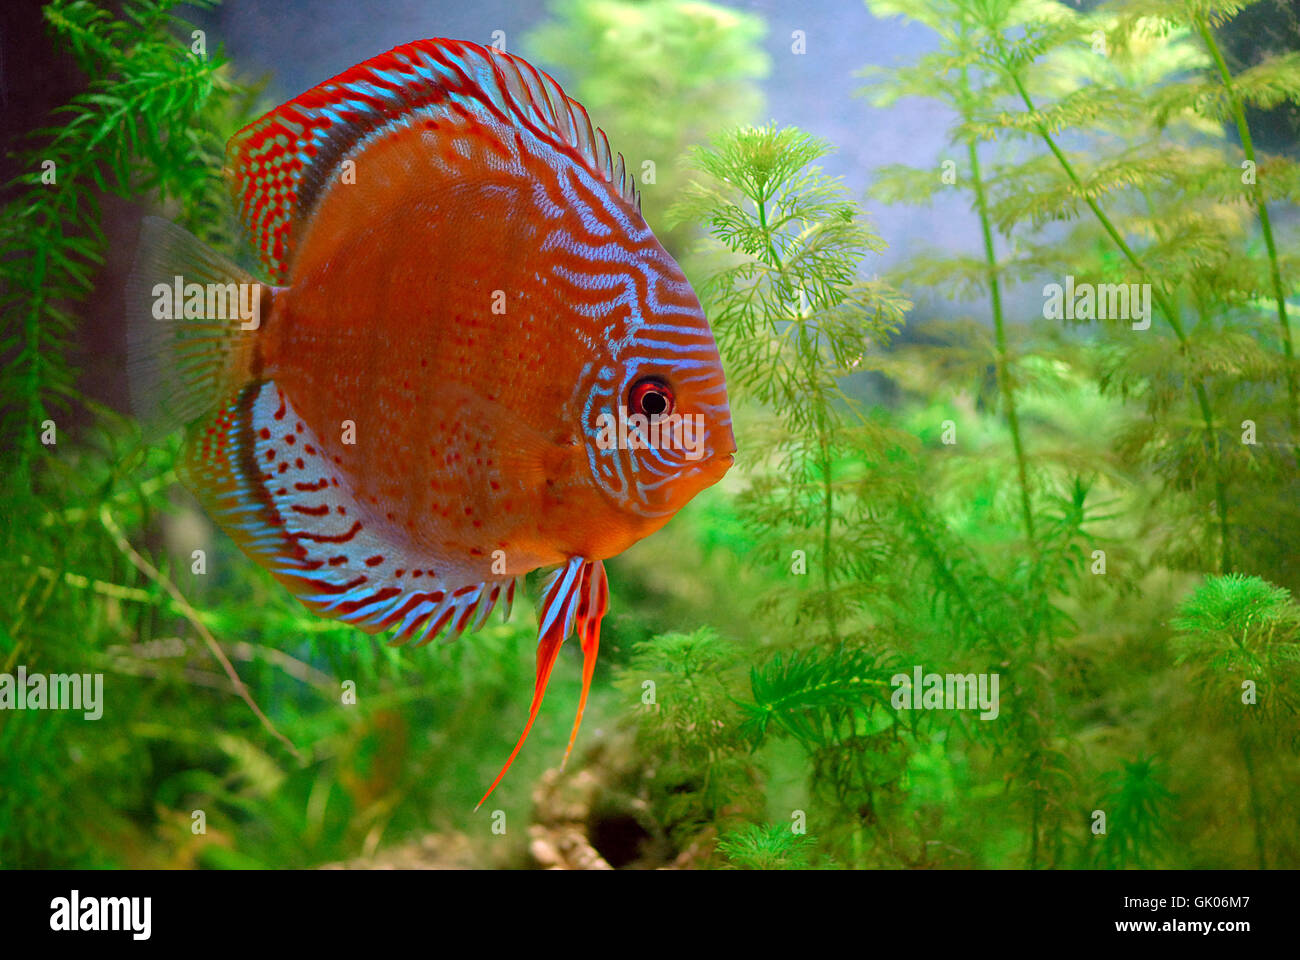 tomboy discus (red spotted tefe) Stock Photo